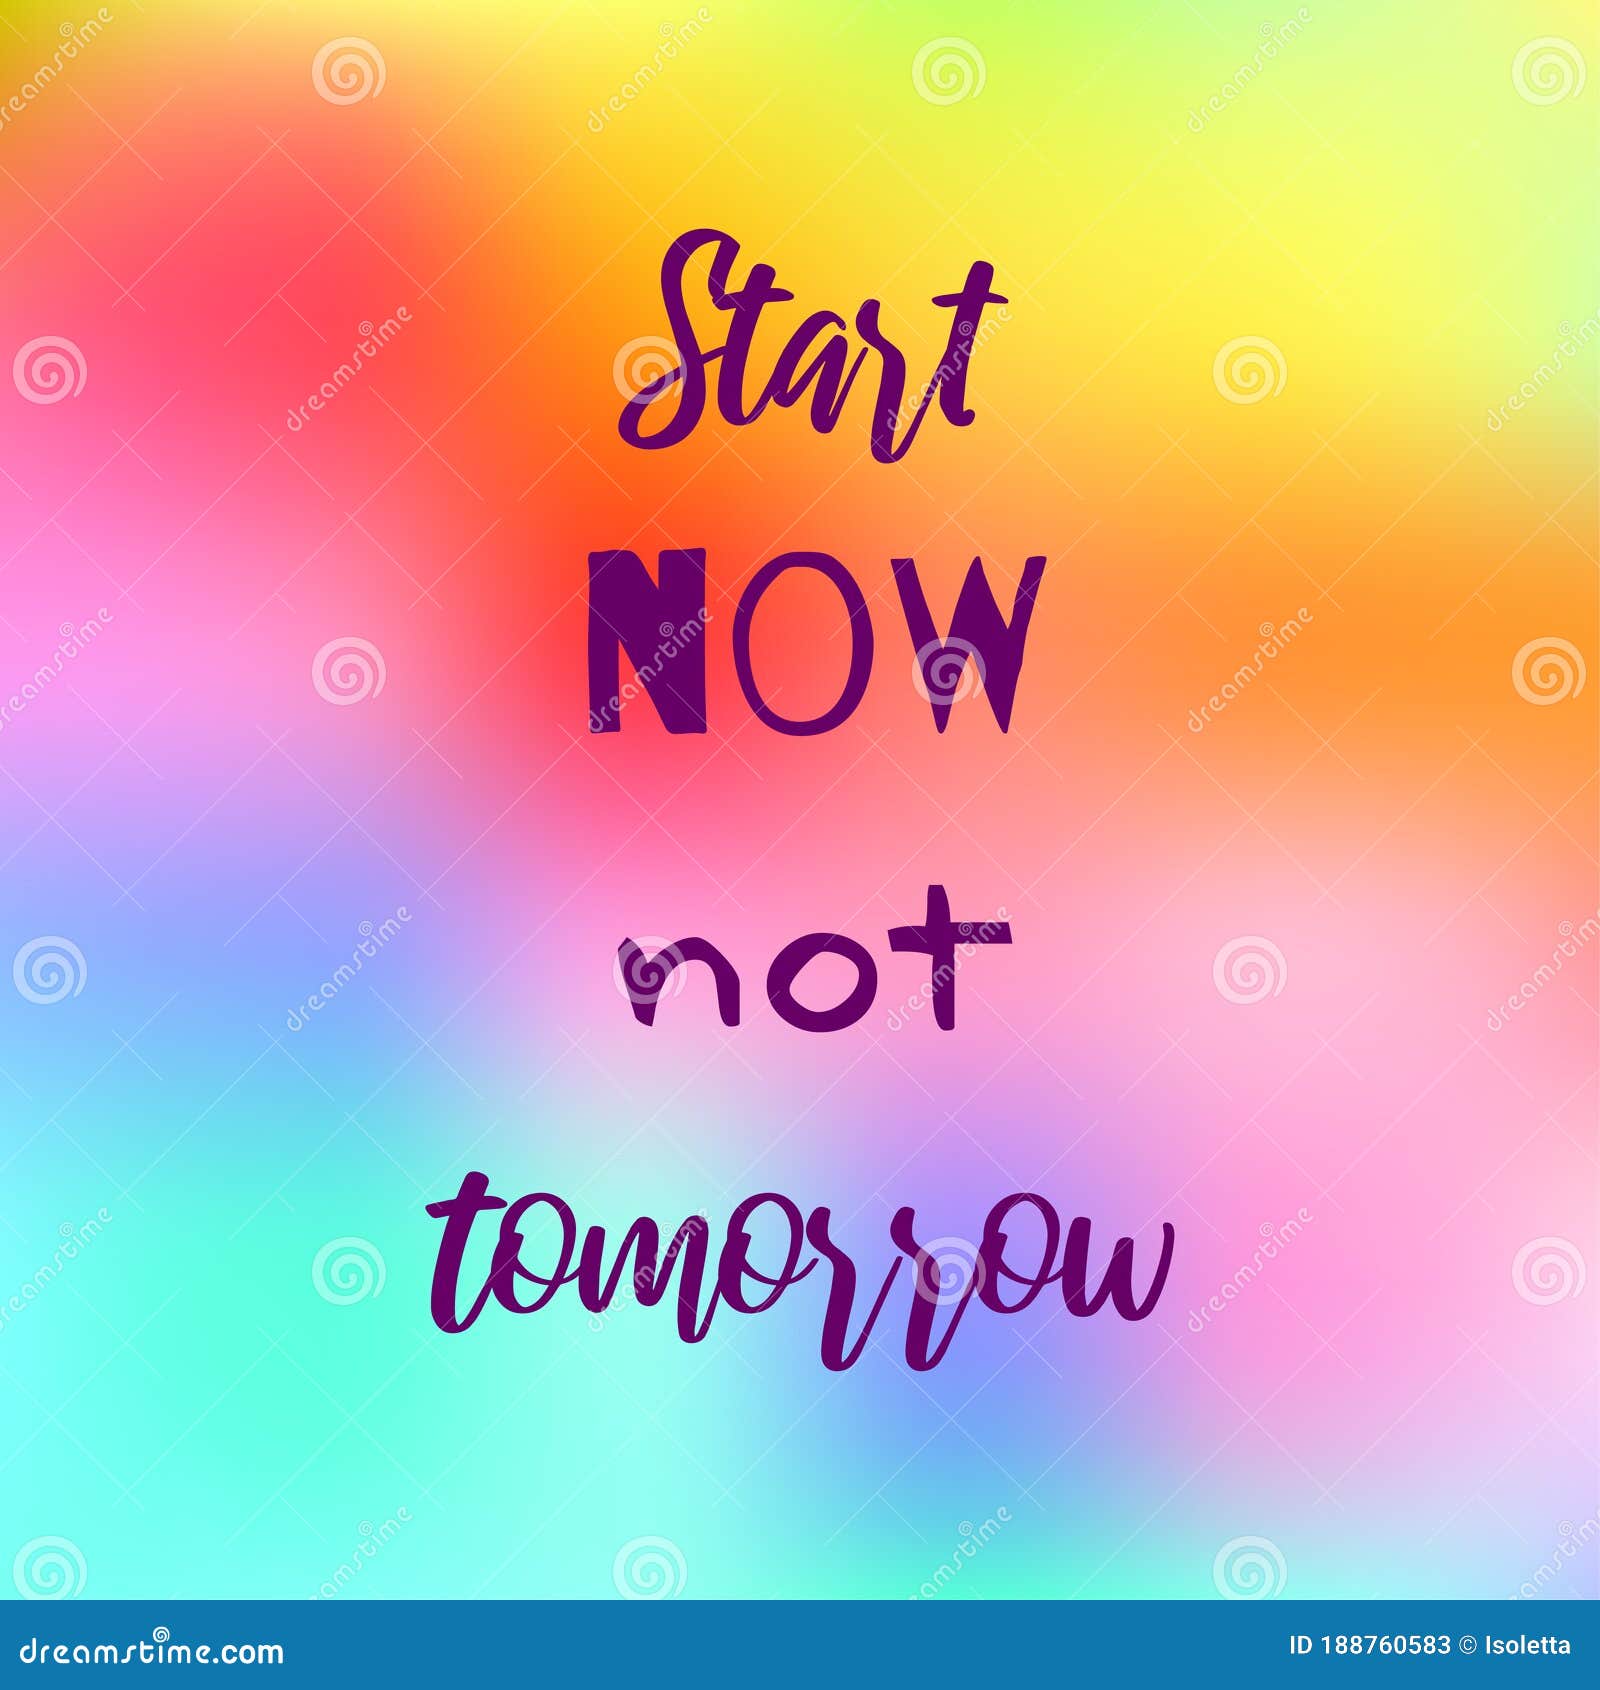 Start today not tomorrow motivational quote Vector Image